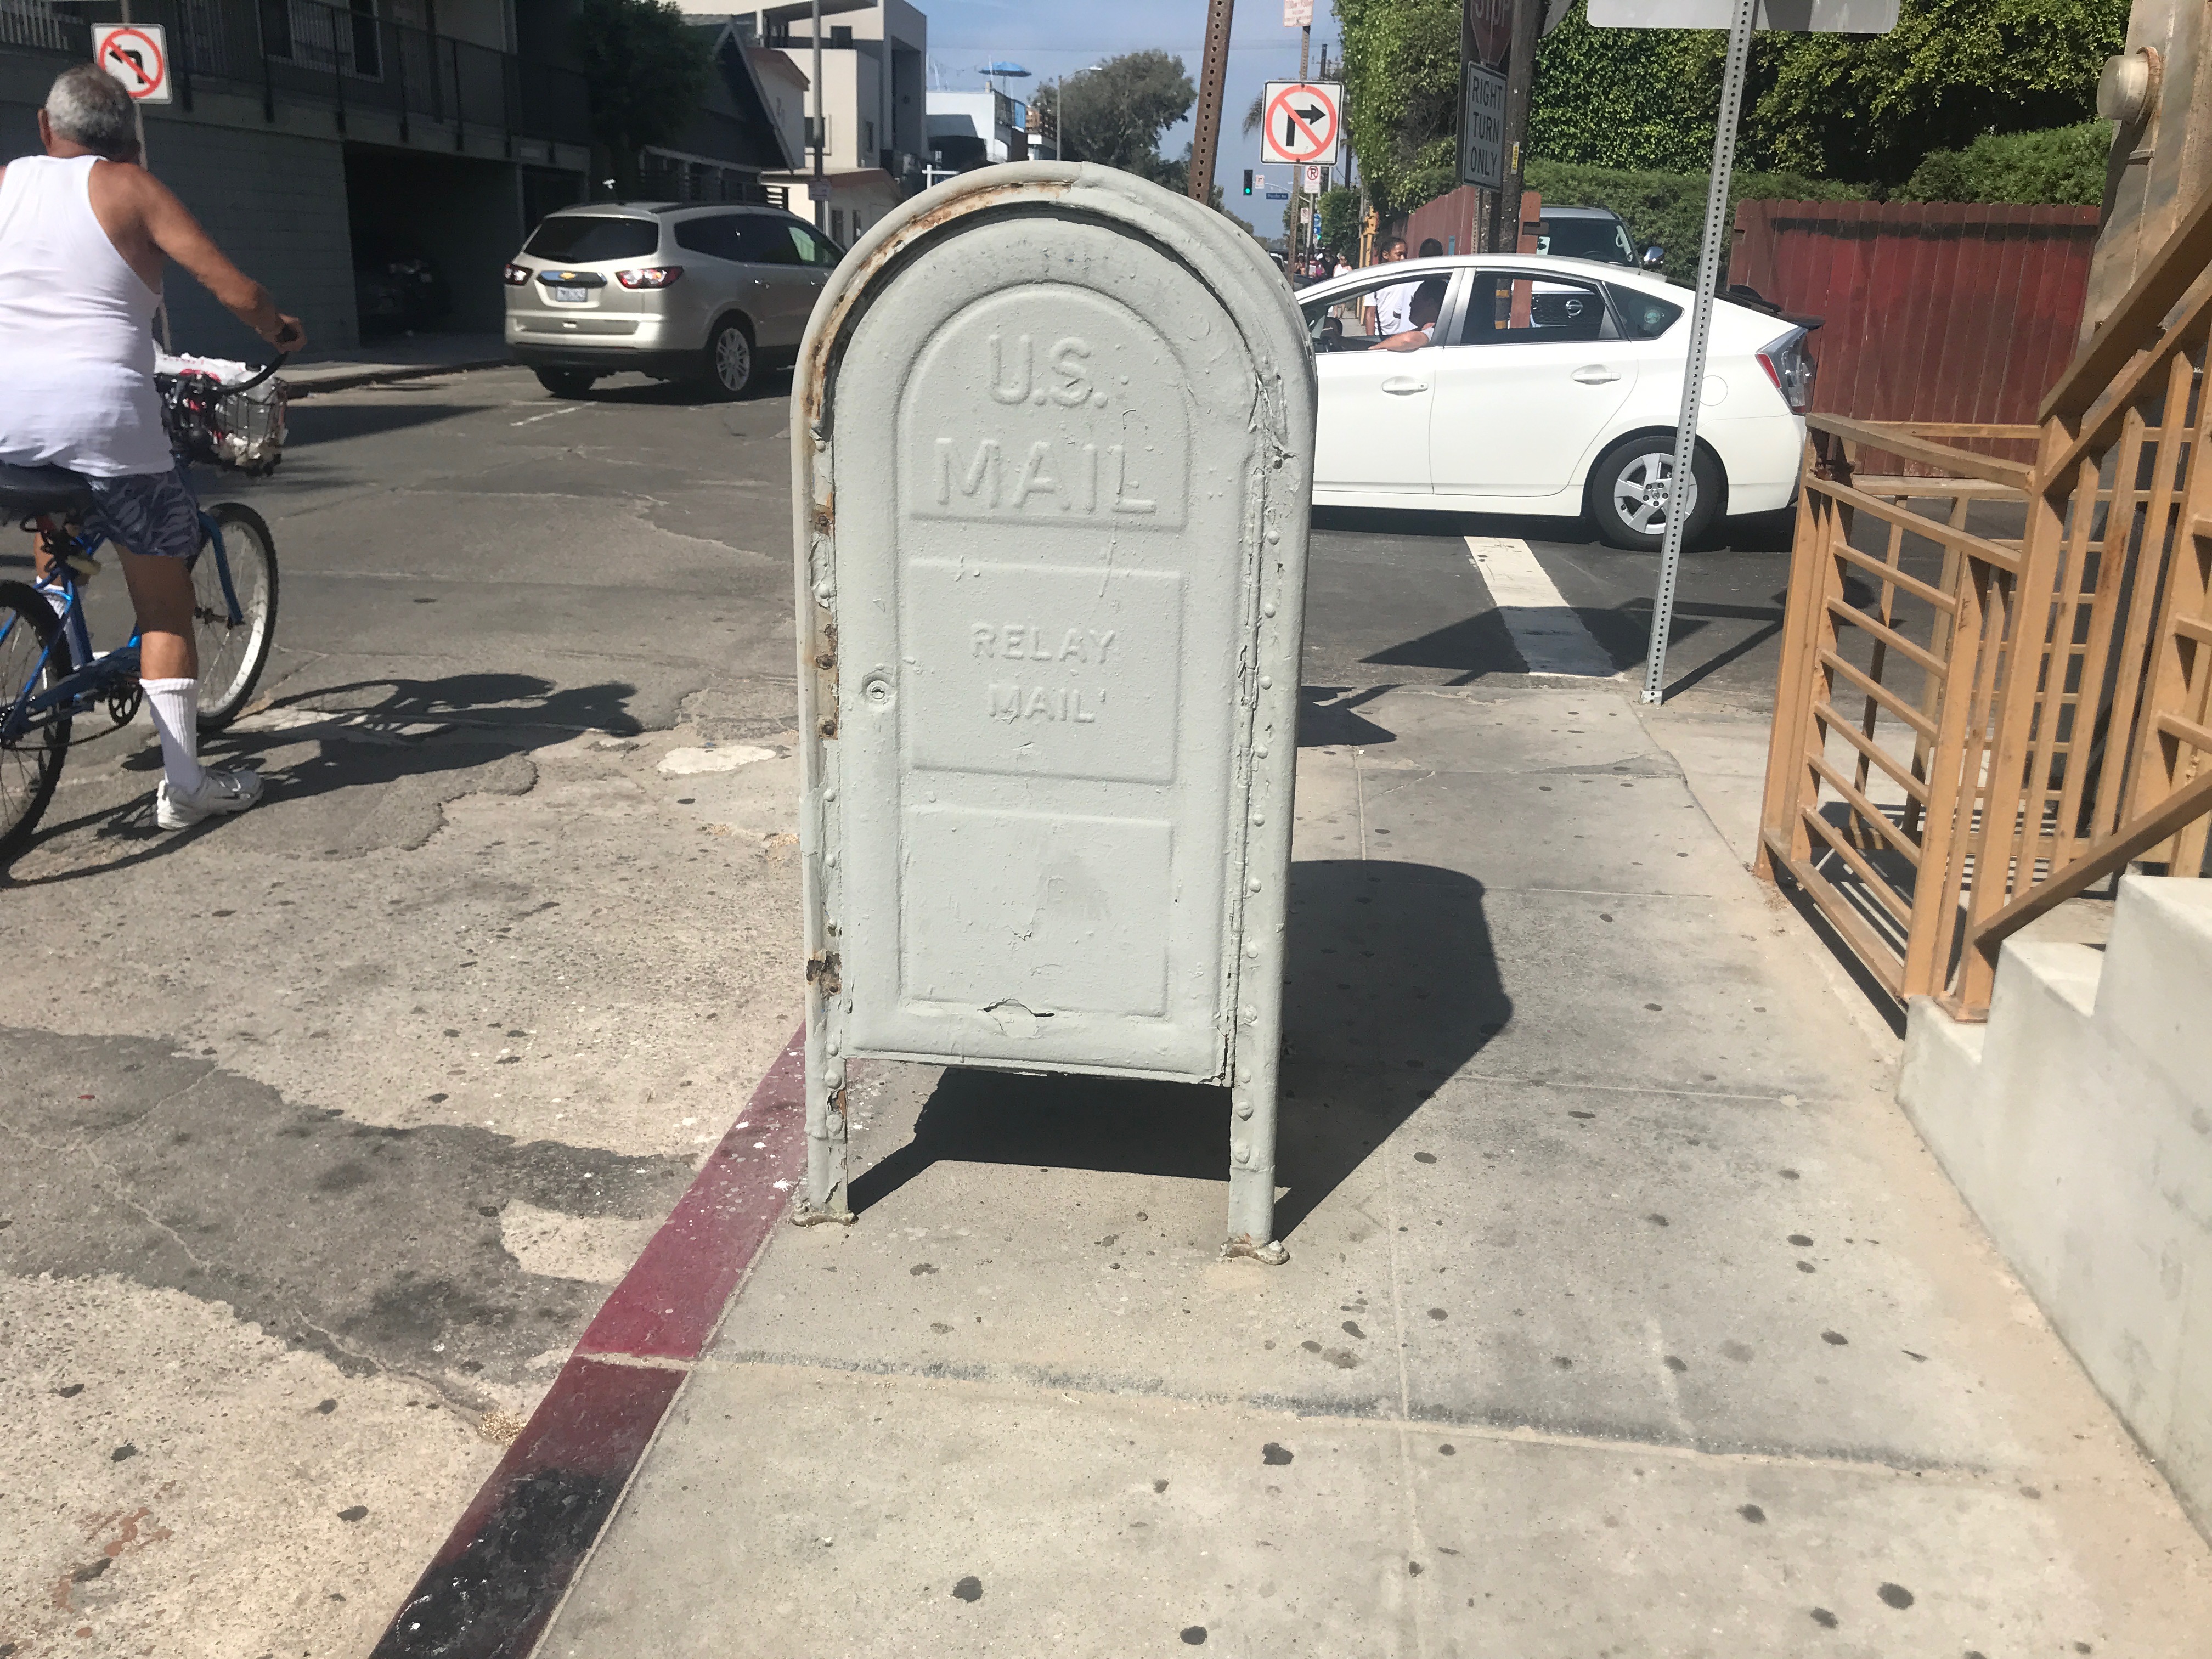 A U.S. Mail collection box in Venice, Los Angeles, California, using the old olive green coloring scheme formerly used between World War I and 1955. Photo taken by Sahand Cyrusian on July 29, 2018.